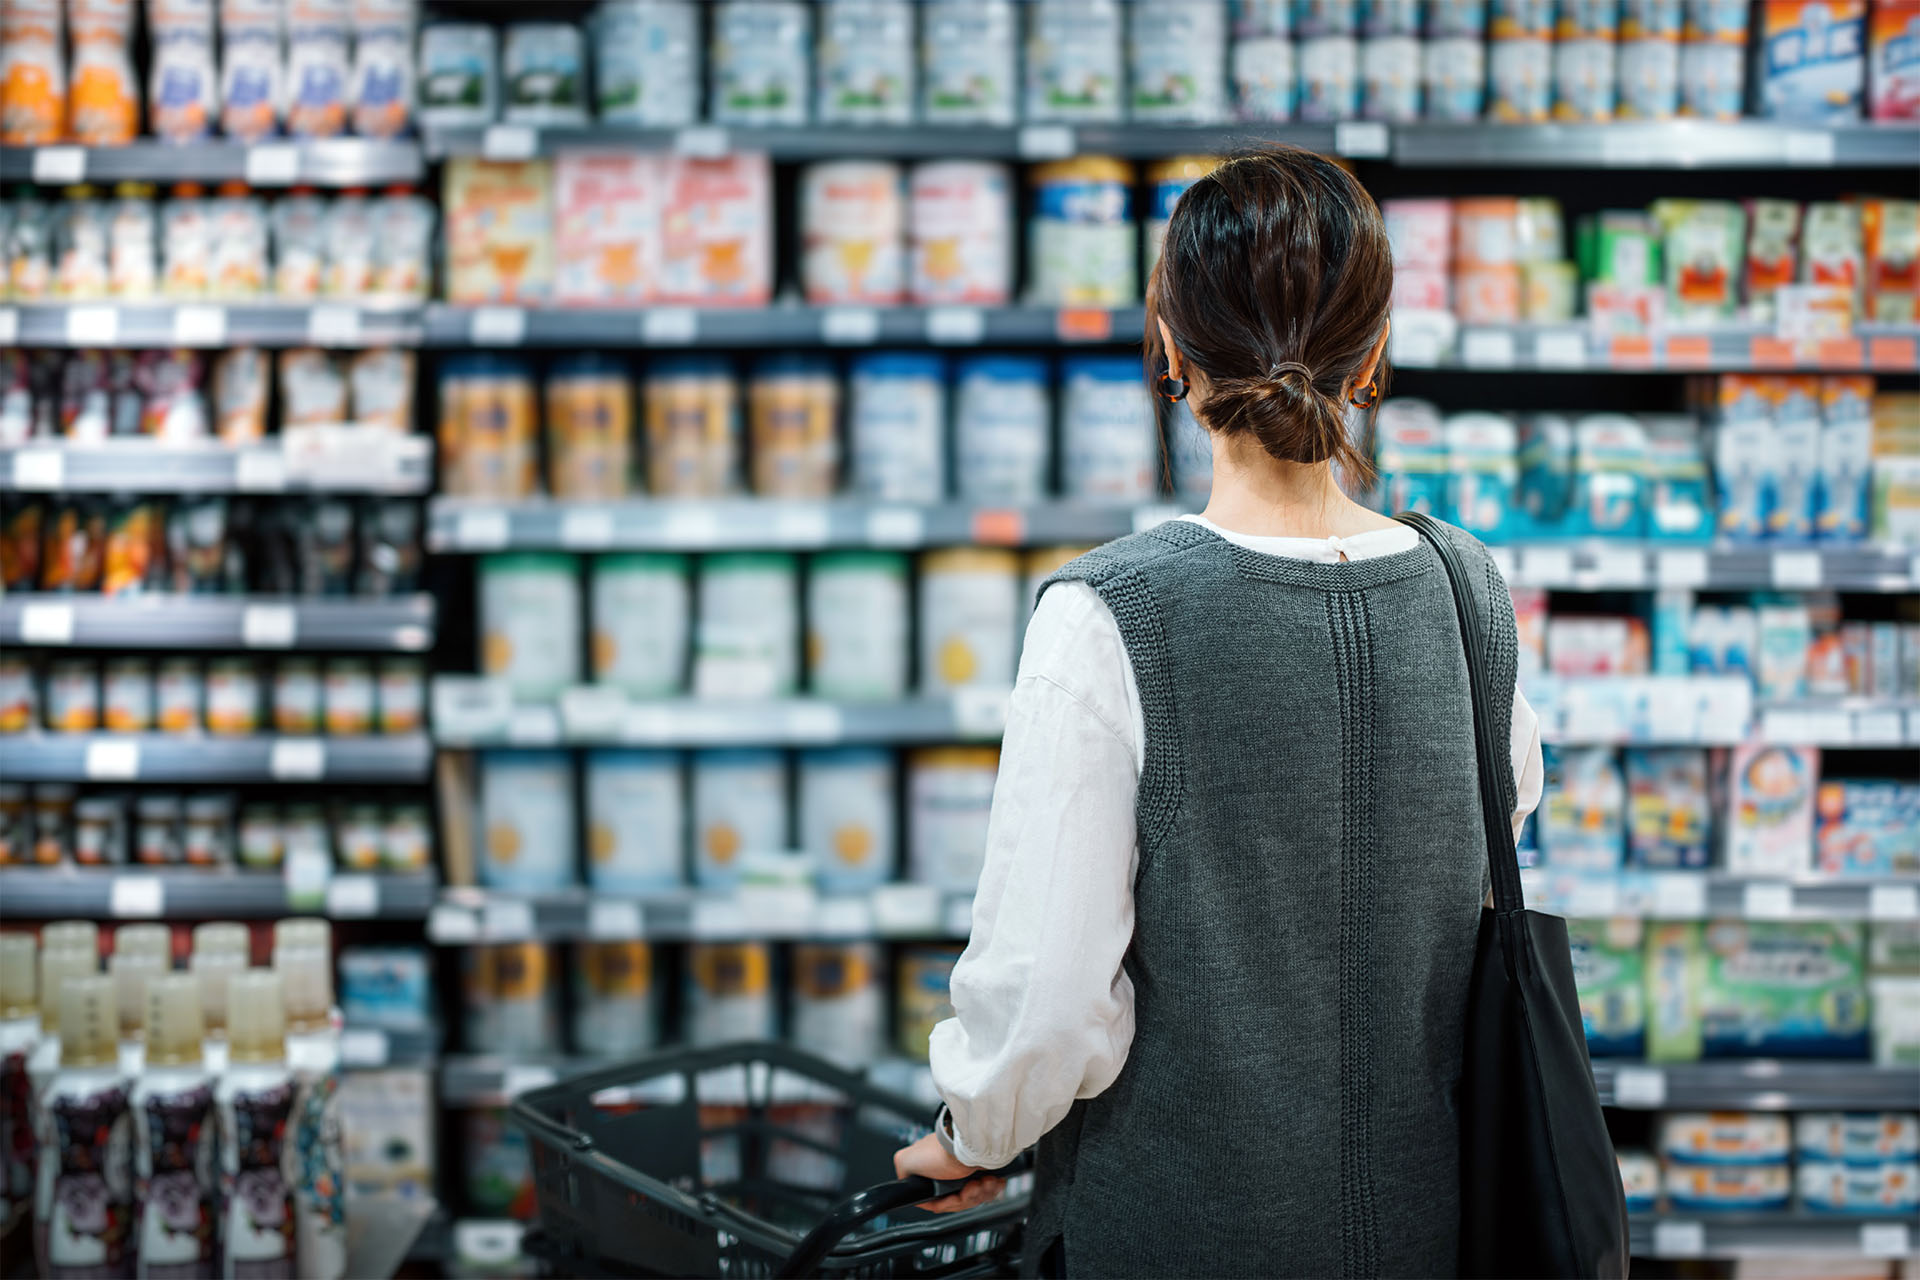 Photo of a person looking at items on a grocery store shelf